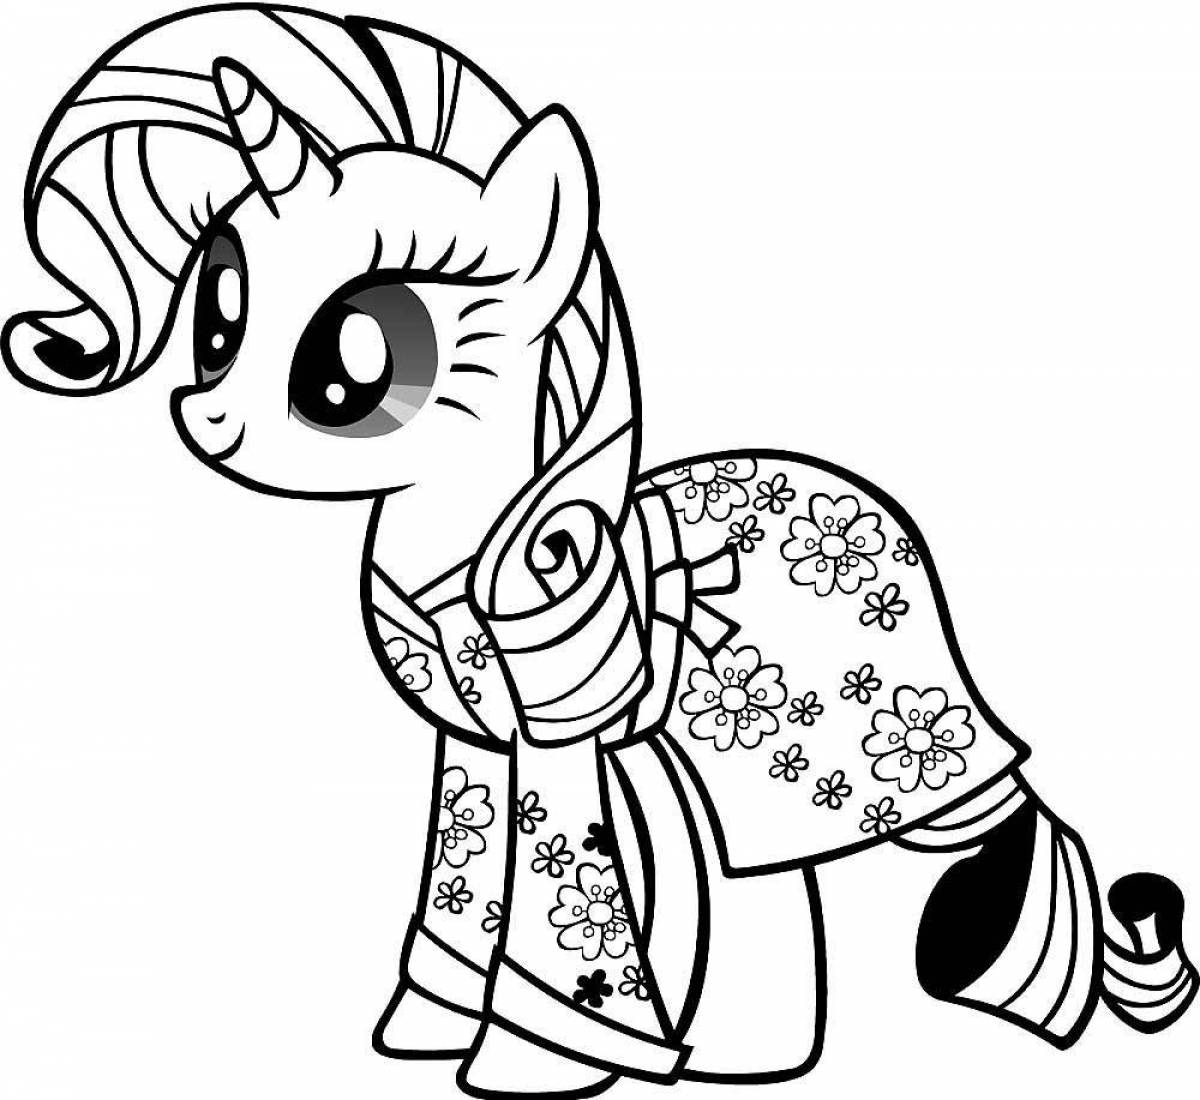 My little pony colorful coloring page